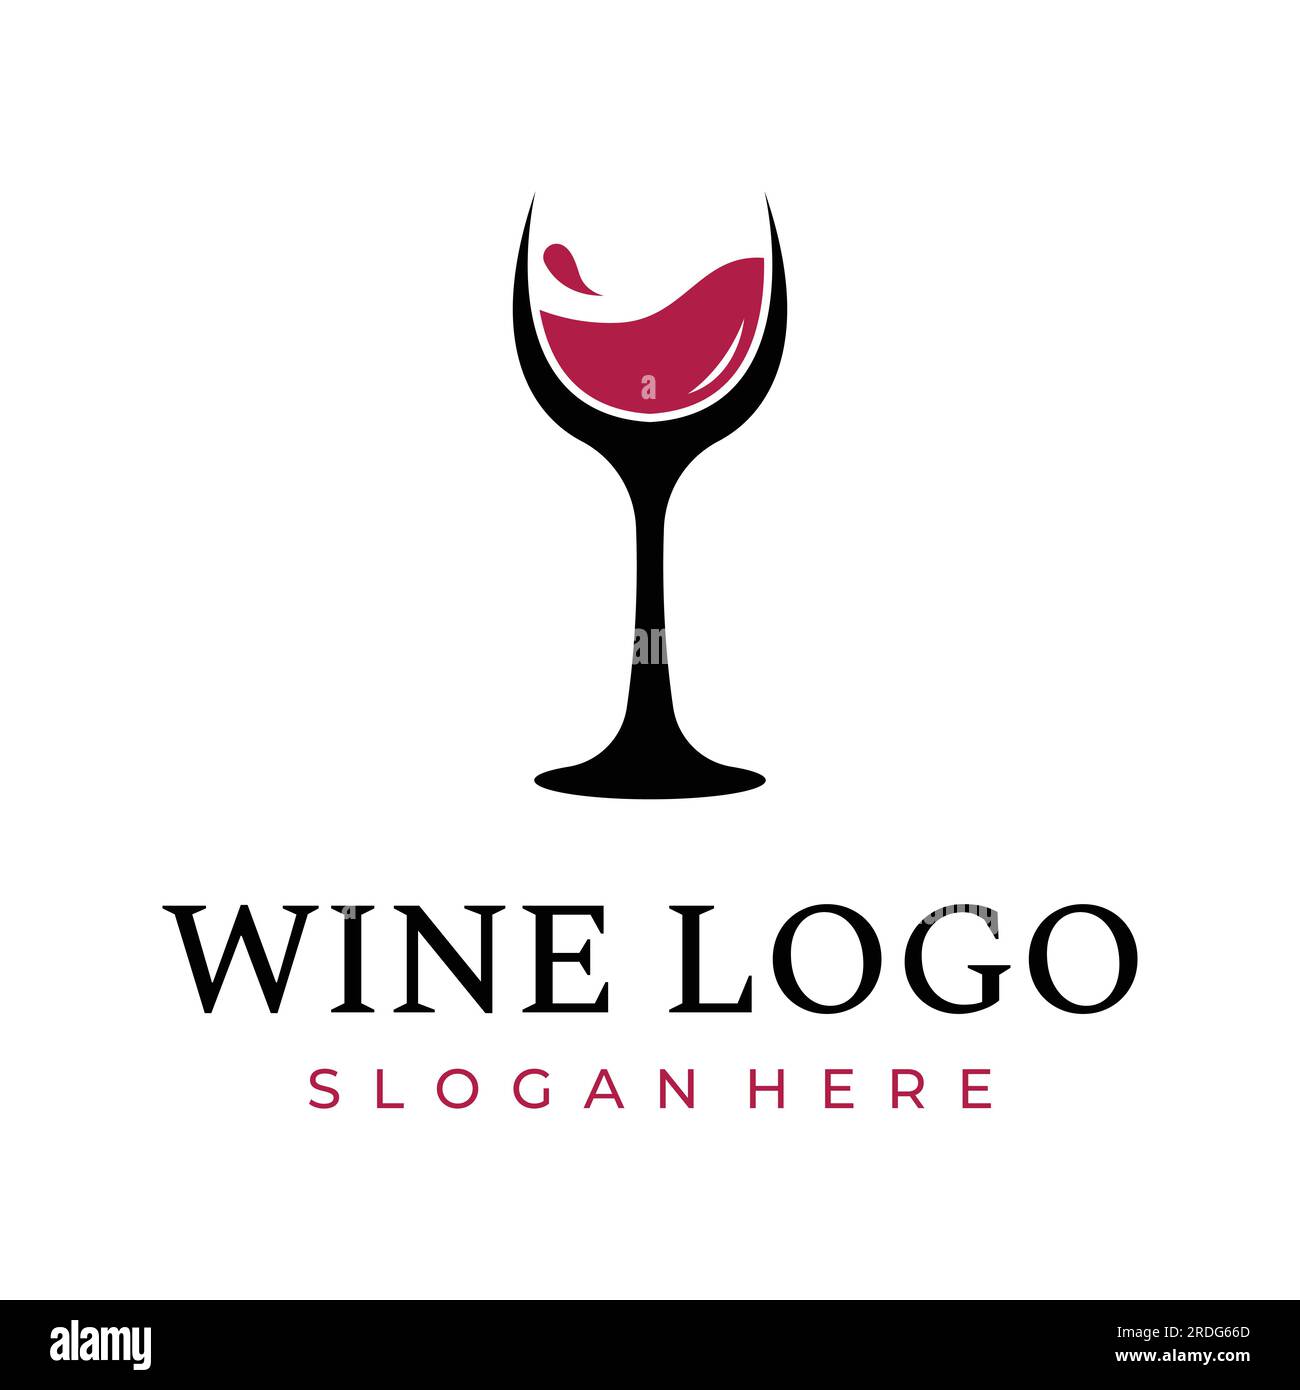 Wine logo design with wine glasses and bottles.Logos for nightclubs, bars and wine shops. Stock Vector